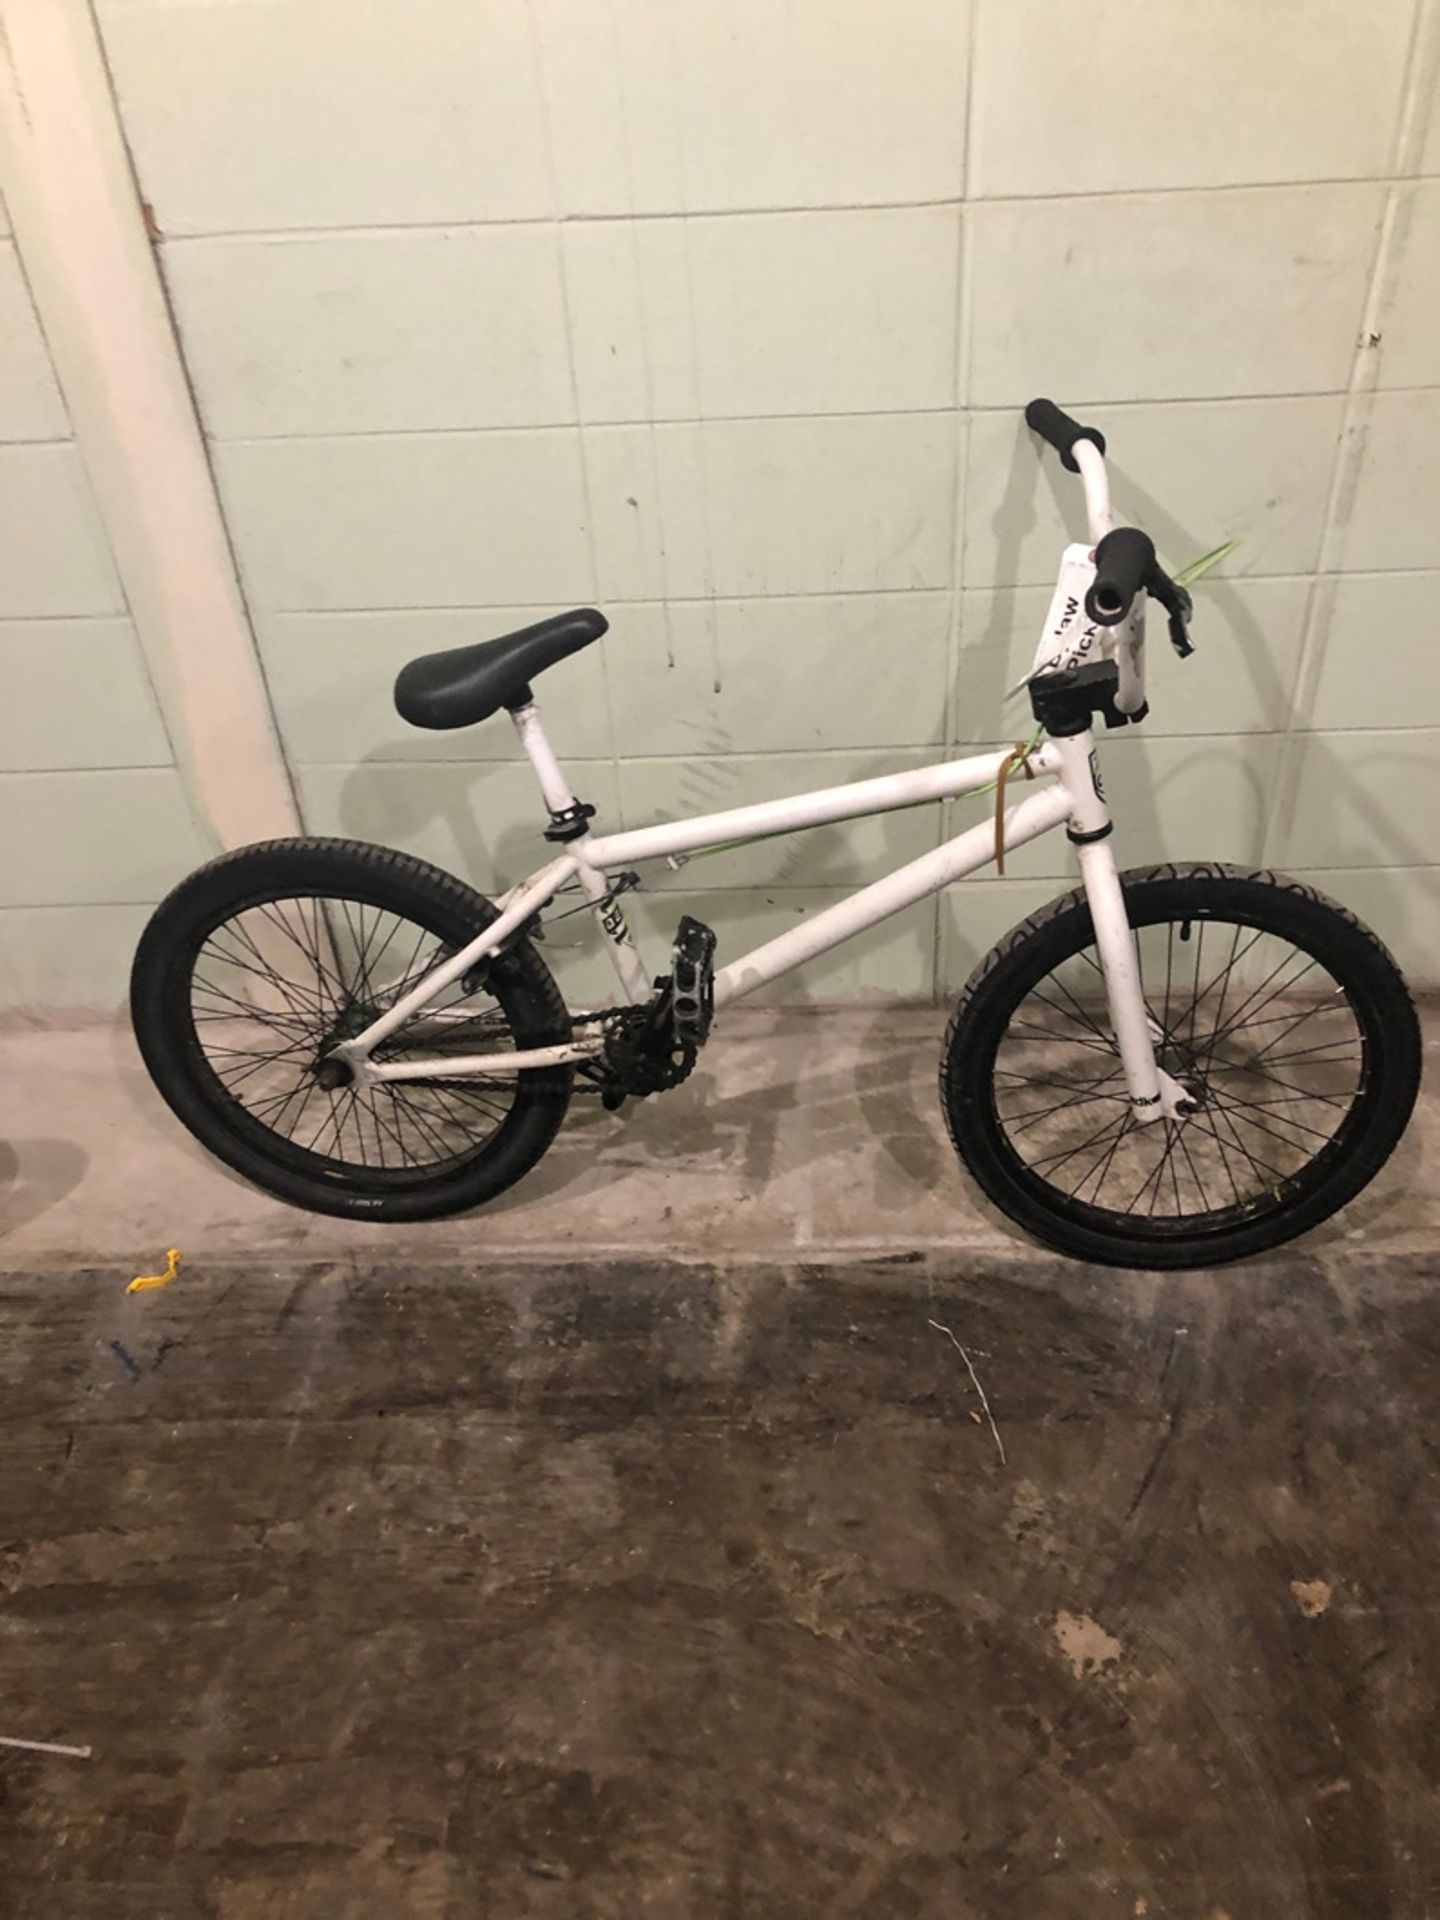 DK WHITE SIZE 20 inches BMX Speed 18 Tag # 372